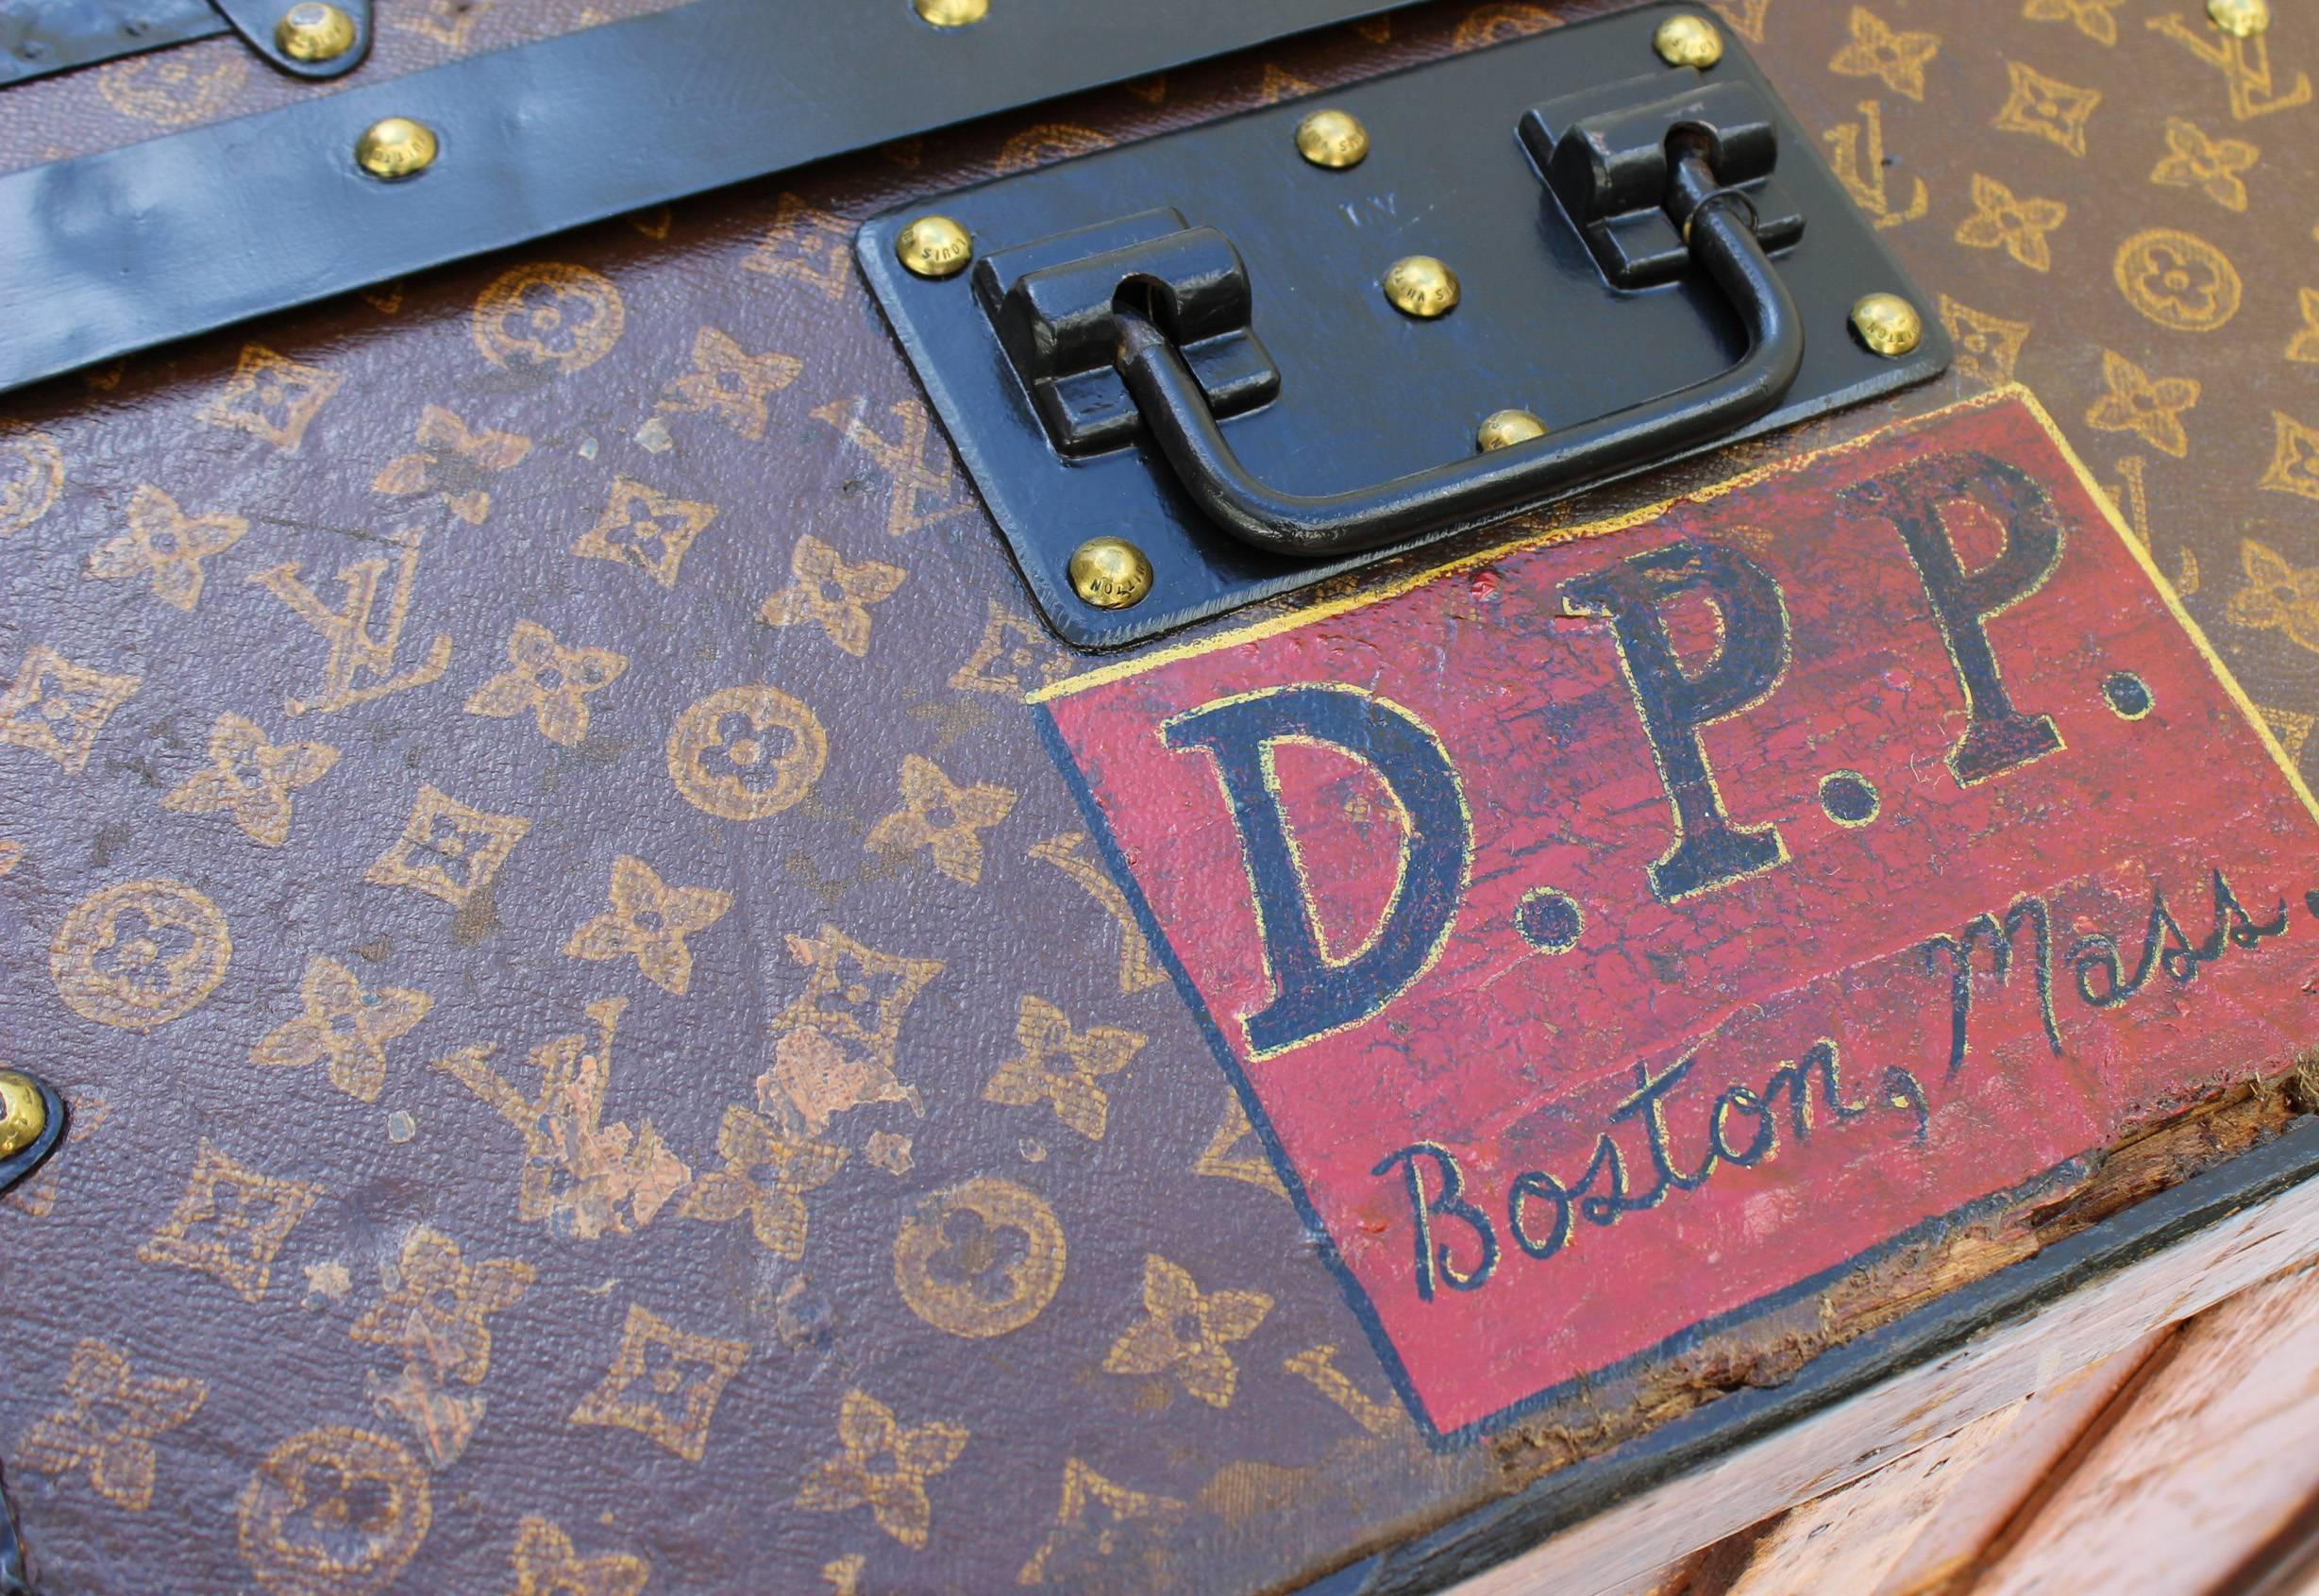 A fine example of a Louis Vuitton Cabin Trunk featuring the hand-stencilled LV monogram design first introduced in 1896. Black mental trim and corners contrast beautifully with the brass central lock, side enclosures and studs all inscribed with